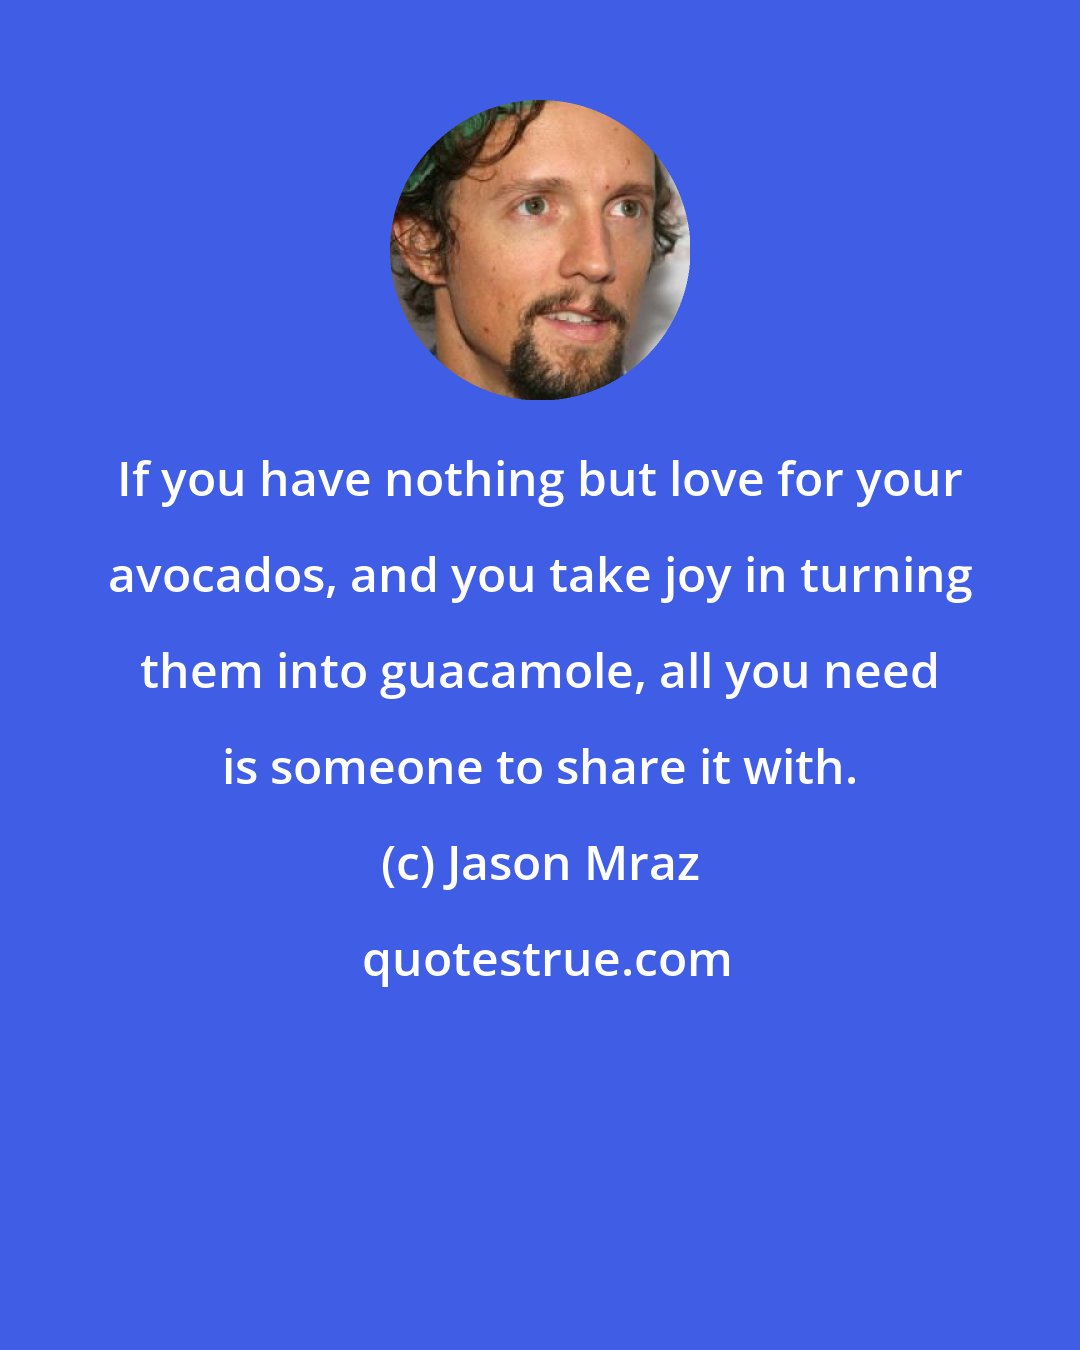 Jason Mraz: If you have nothing but love for your avocados, and you take joy in turning them into guacamole, all you need is someone to share it with.